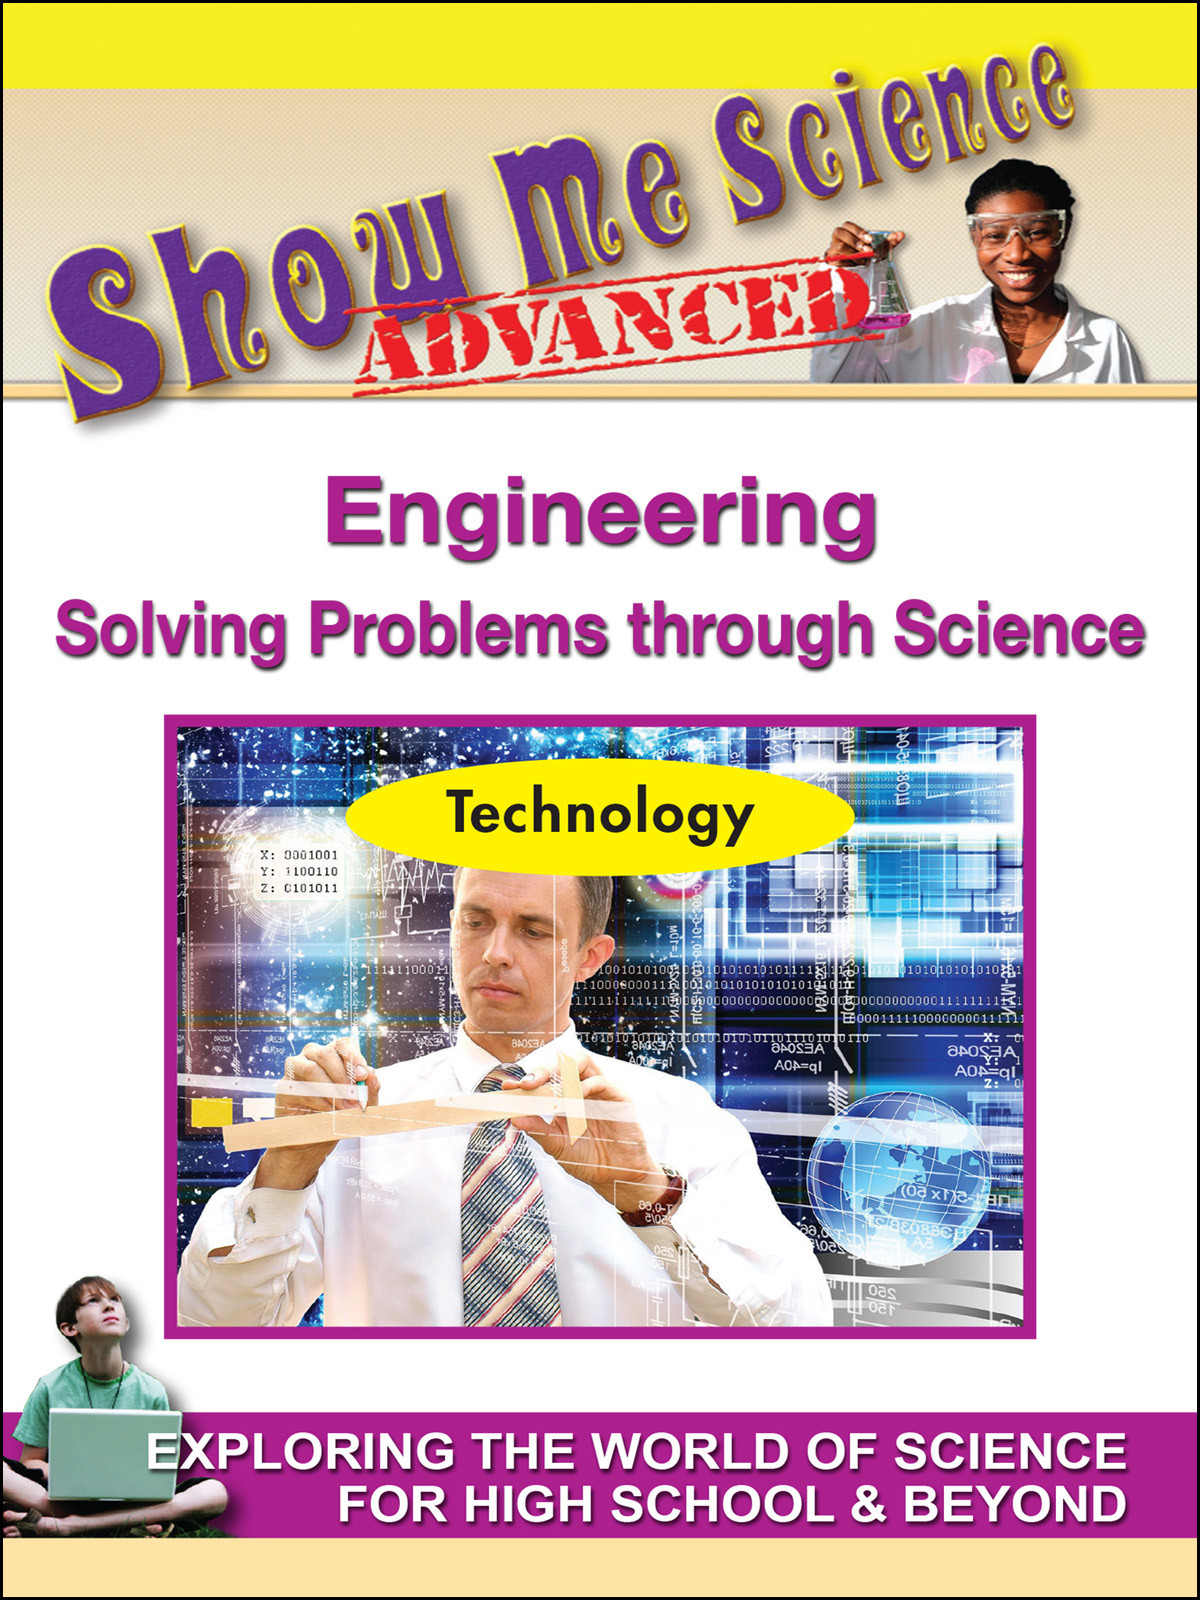 K4605 - Engineering Solving Problems through Science